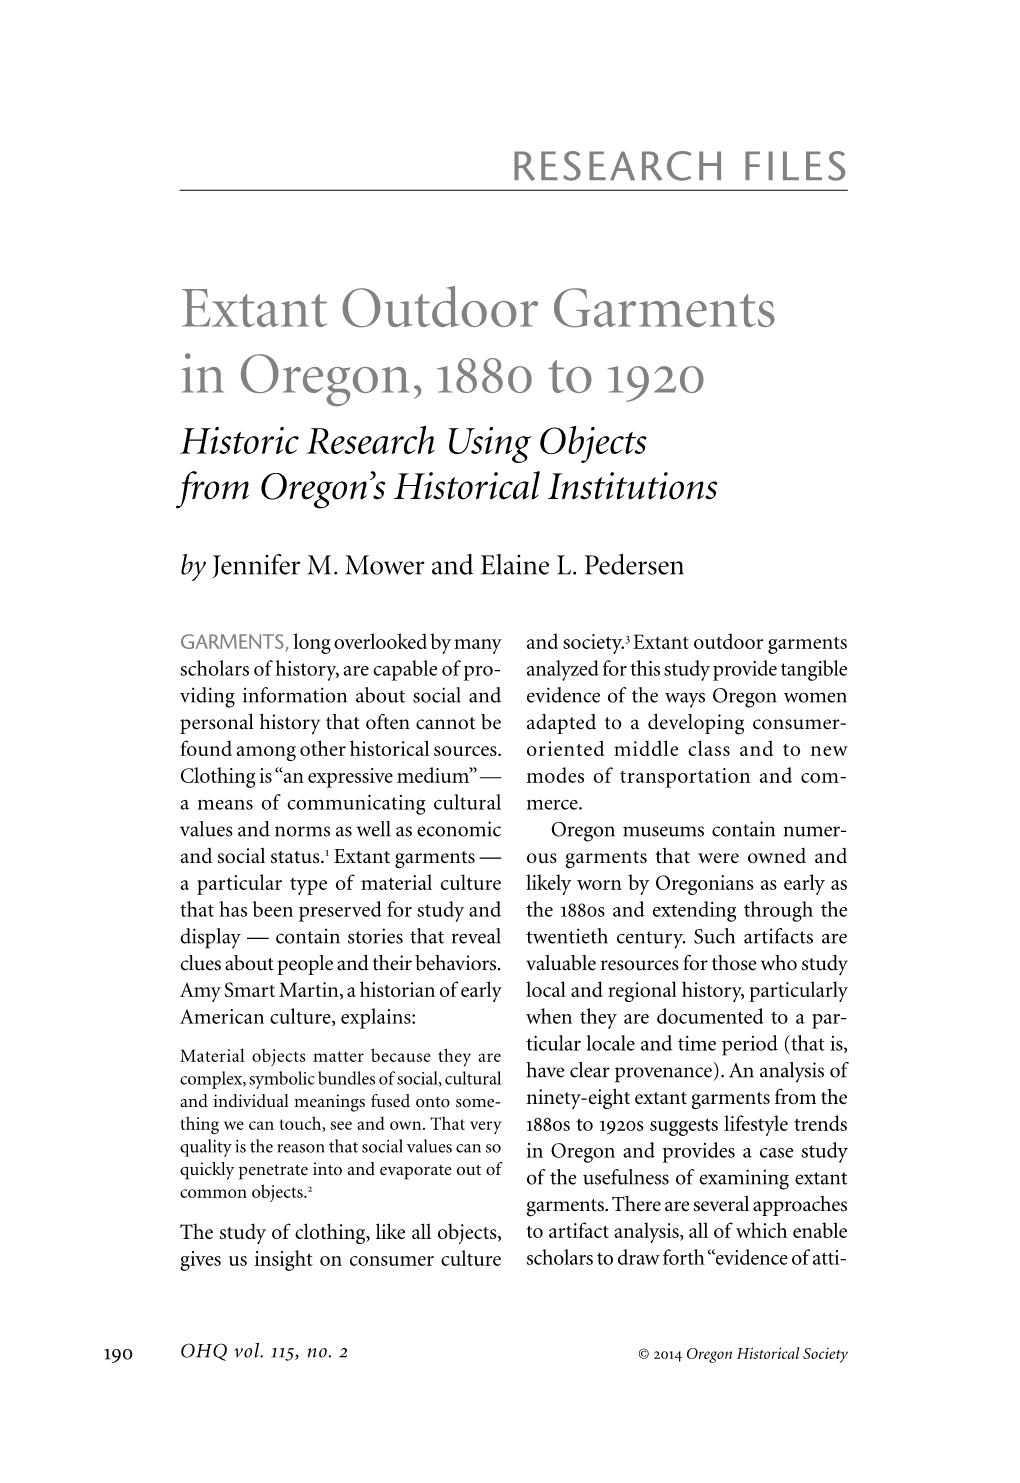 Extant Outdoor Garments in Oregon, 1880 to 1920 Historic Research Using Objects from Oregon’S Historical Institutions